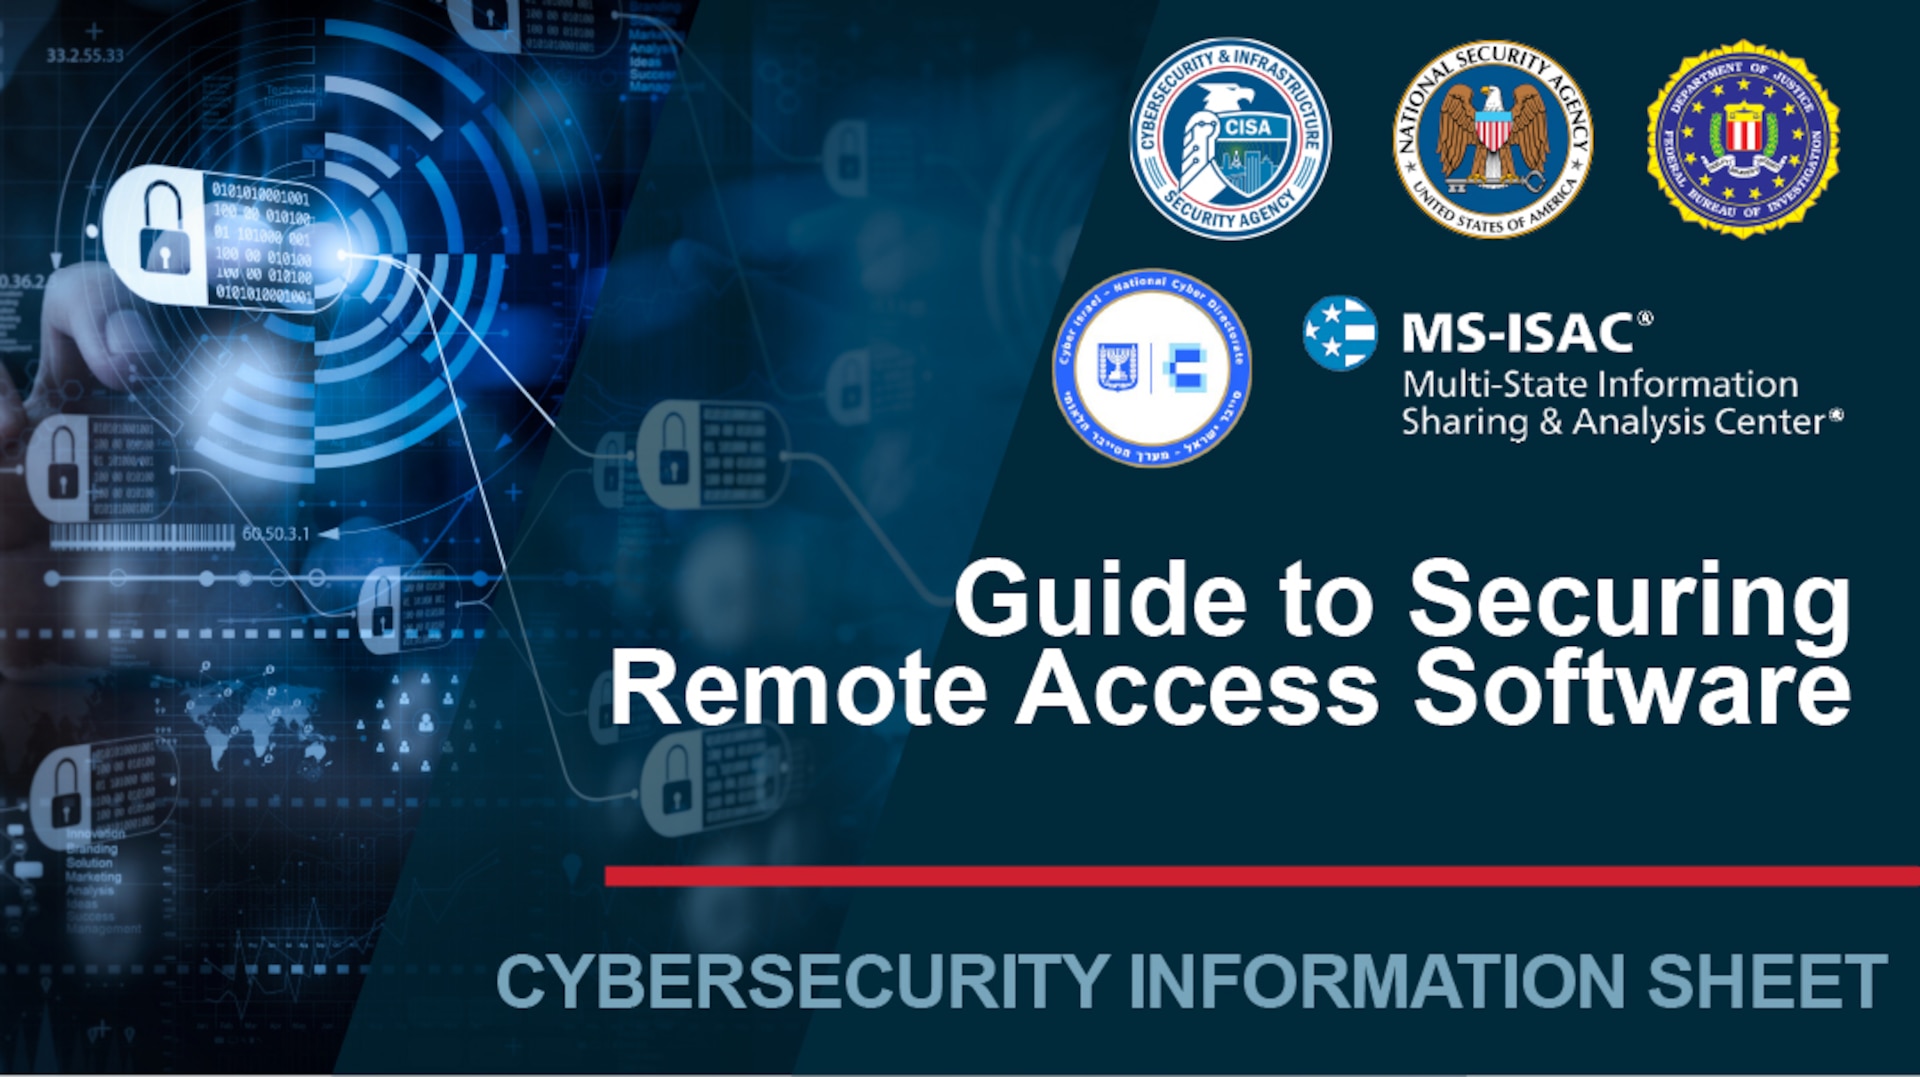 Guide to Securing Remote Access Software. Cybersecurity Information Sheet.